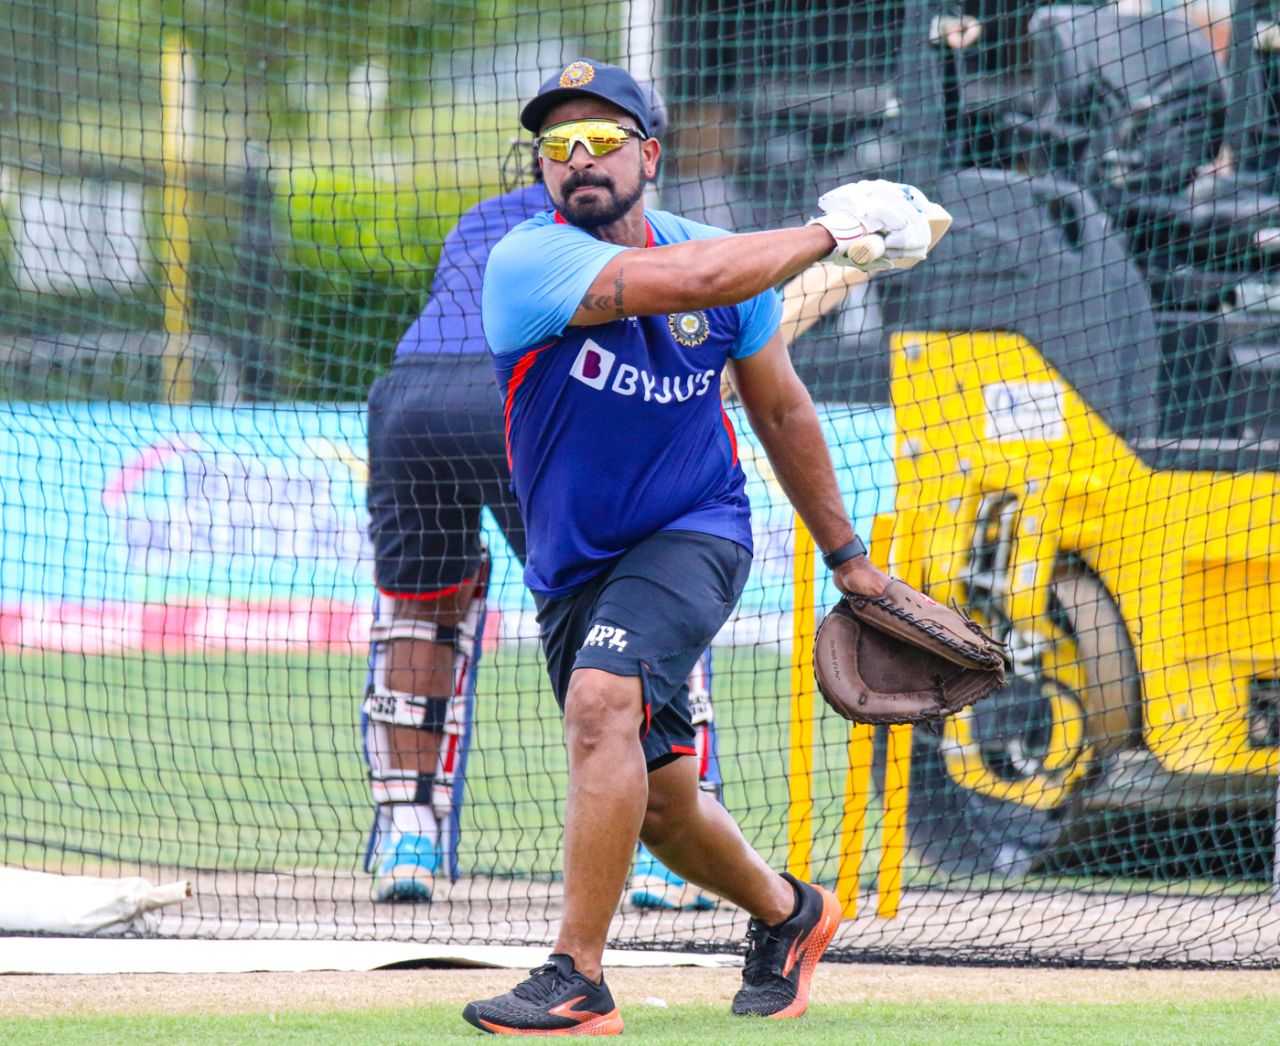 India fielding coach T Dilip hits high catches during training, West Indies vs India, 4th T20I, Lauderhill, August 5, 2022